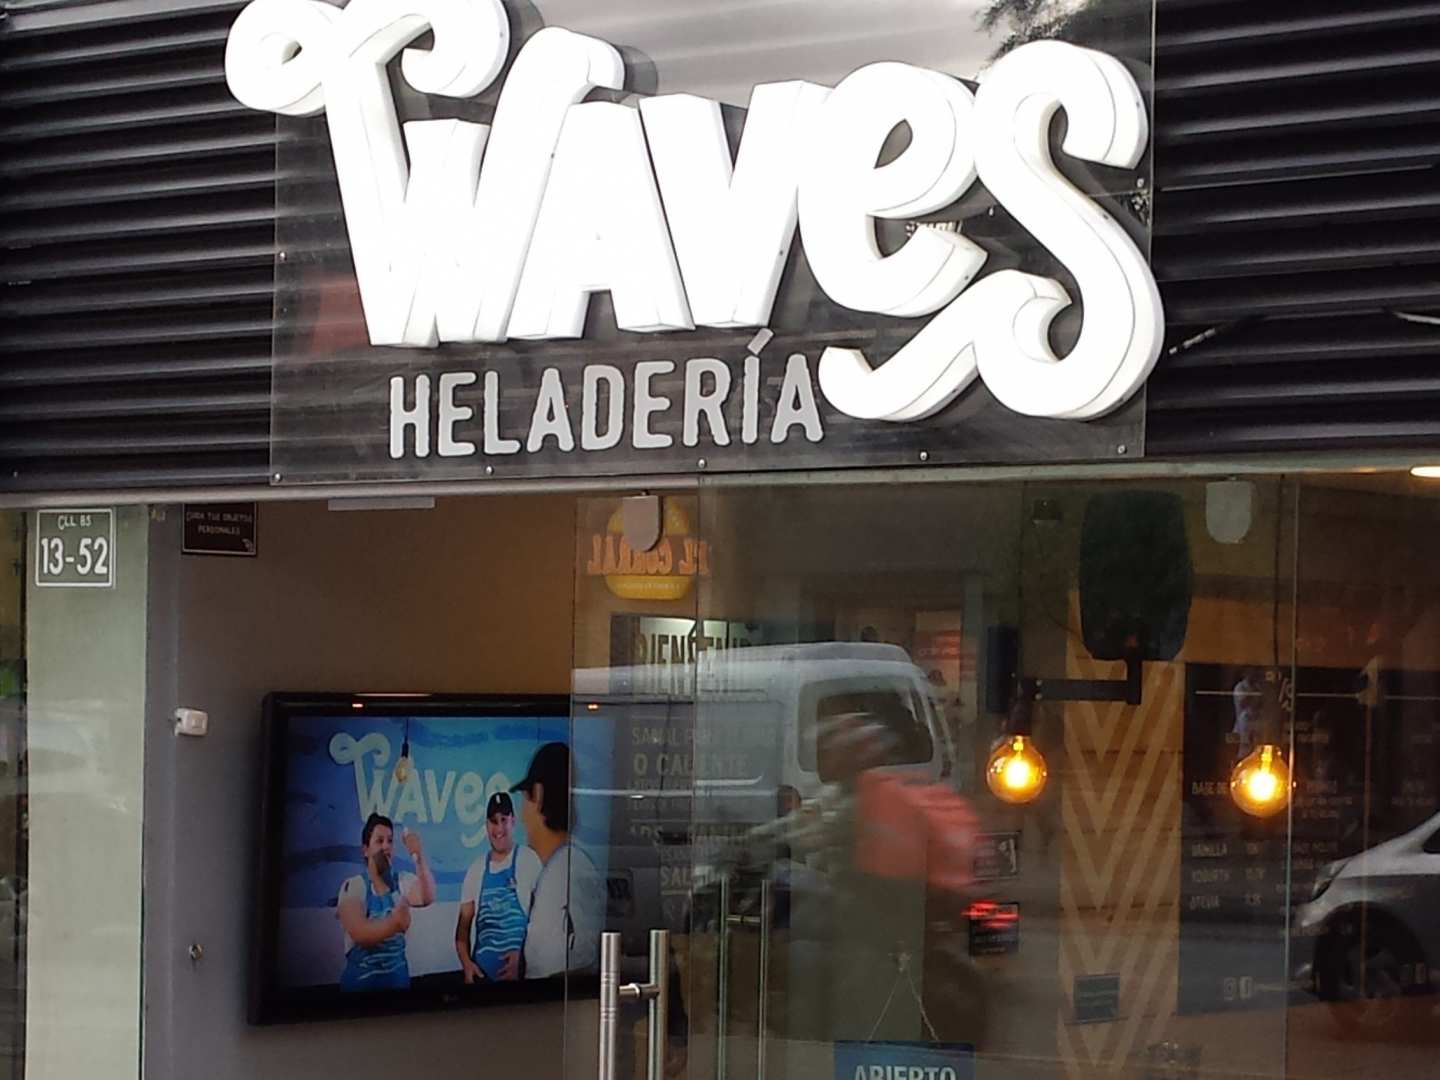 Waves (calle 85)